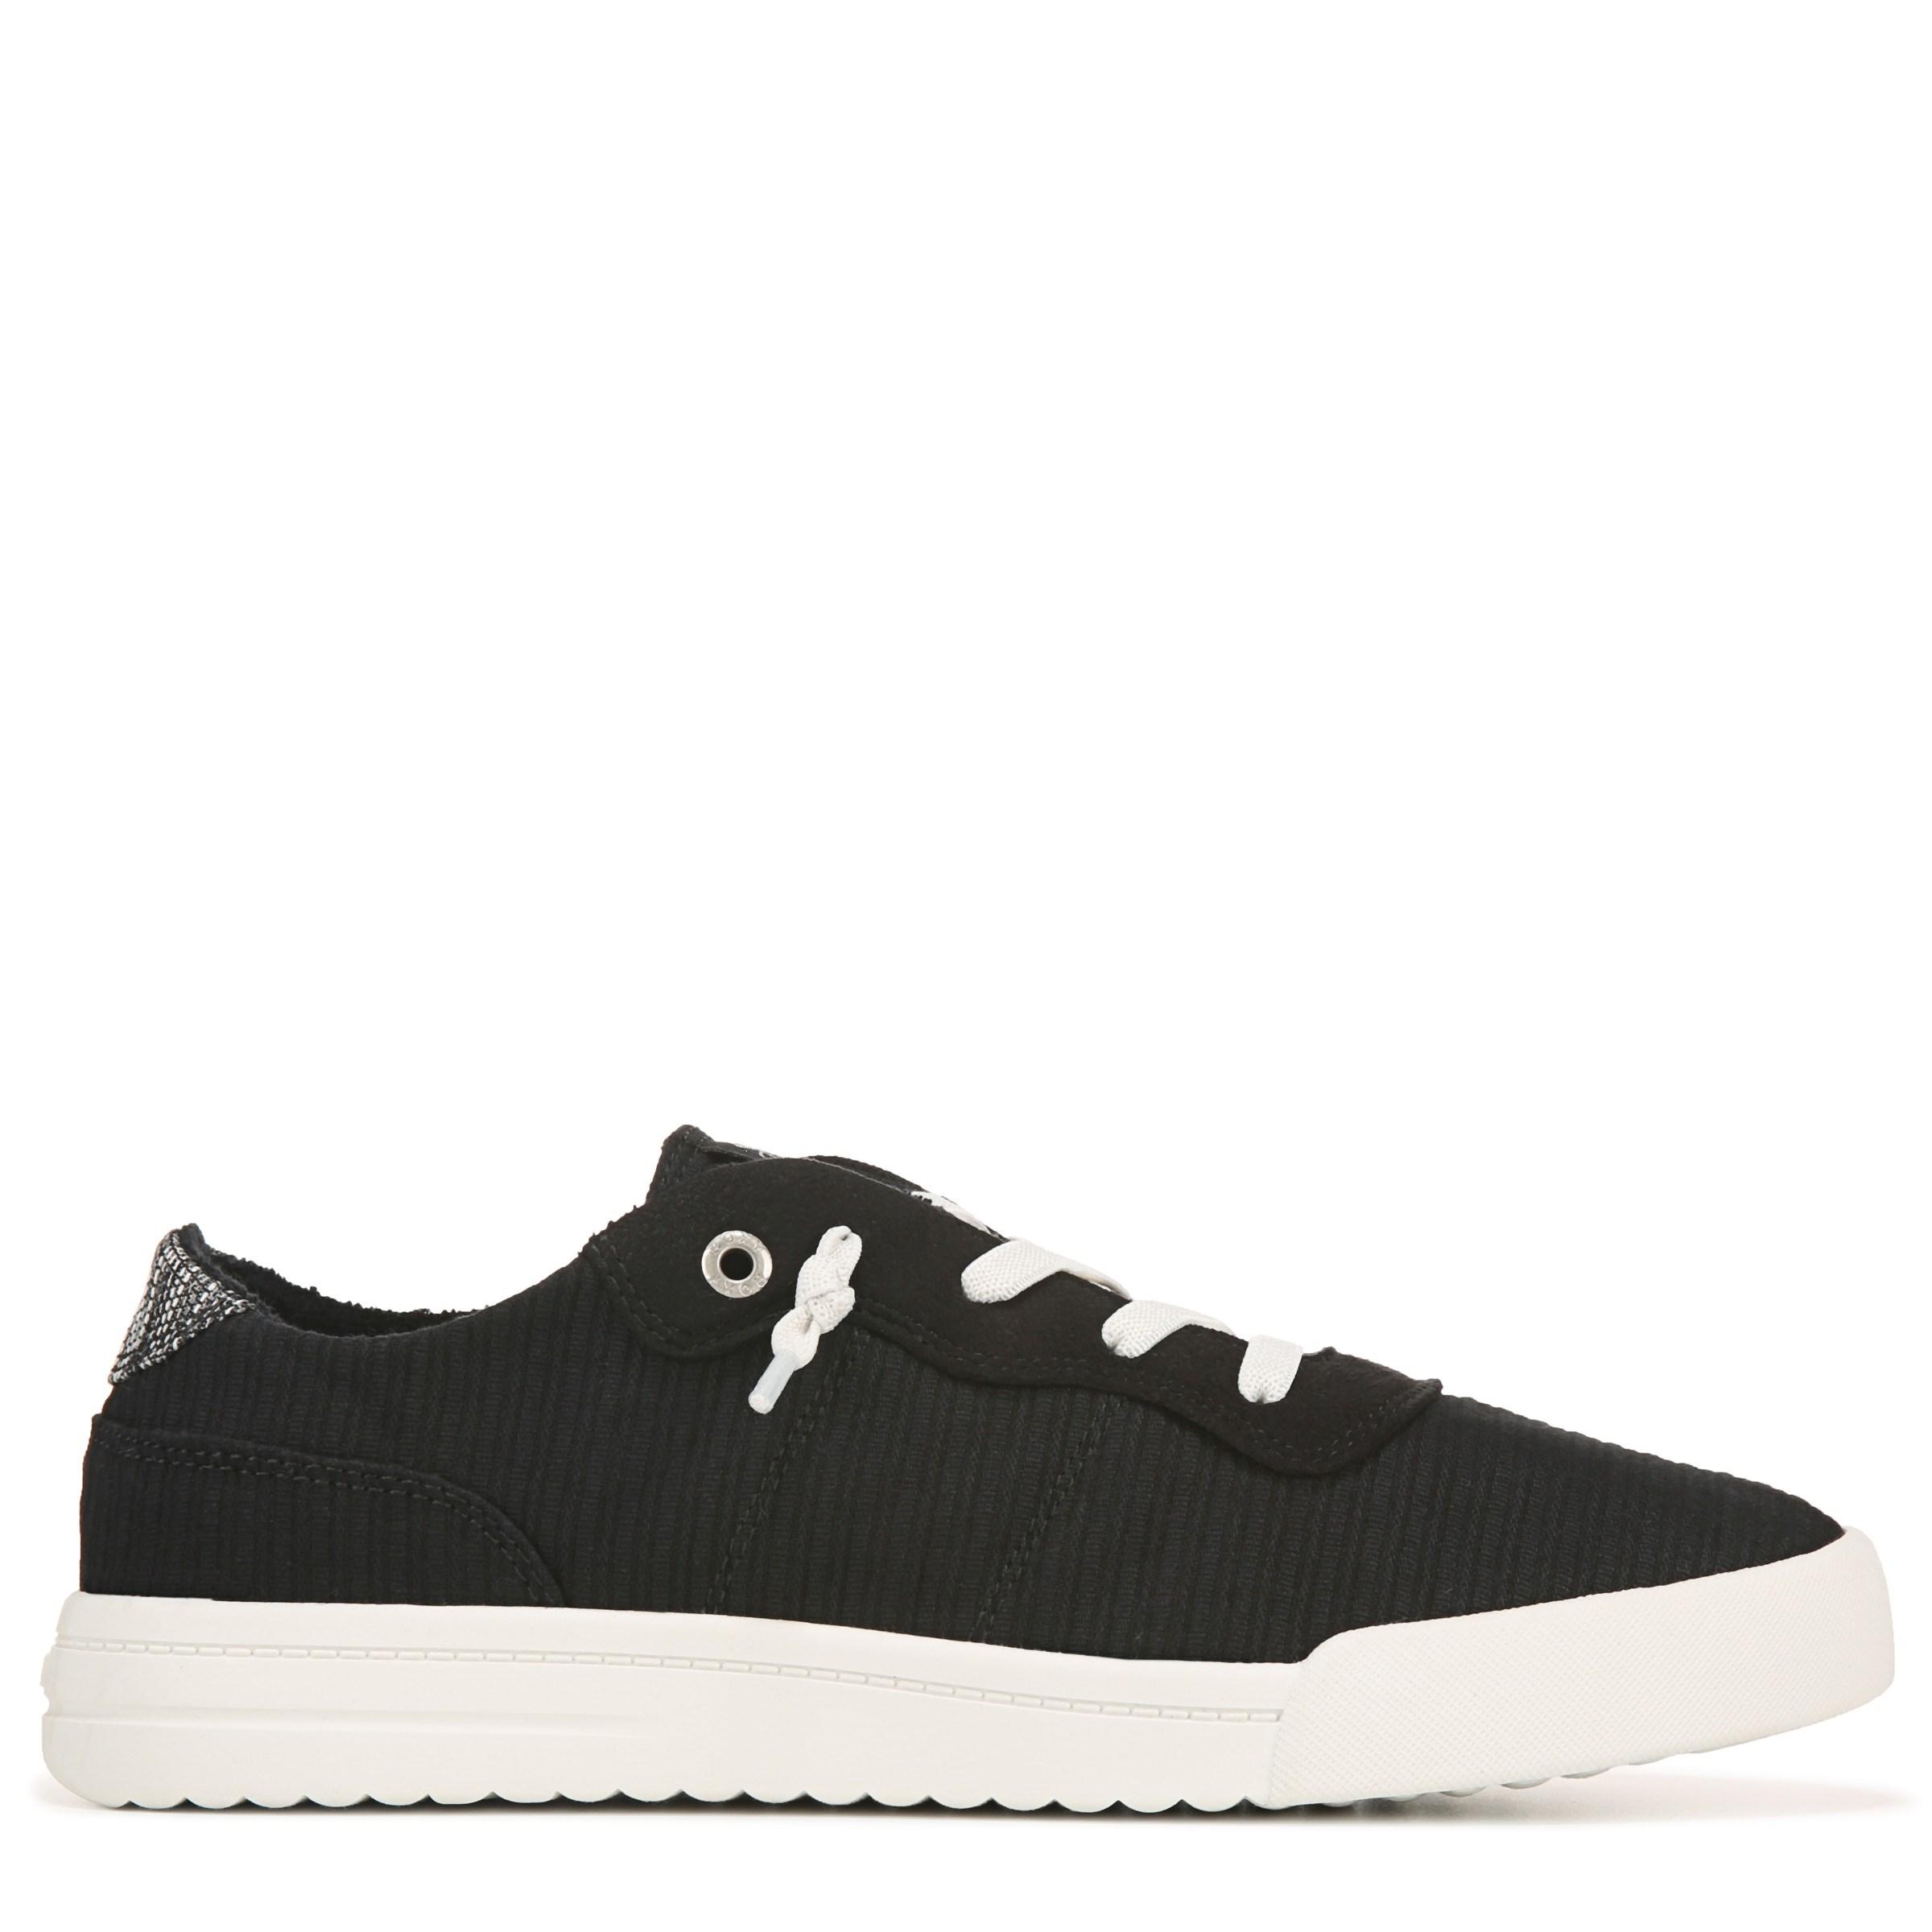 Roxy Canvas Cannon Sneakers in Black - Save 17% - Lyst